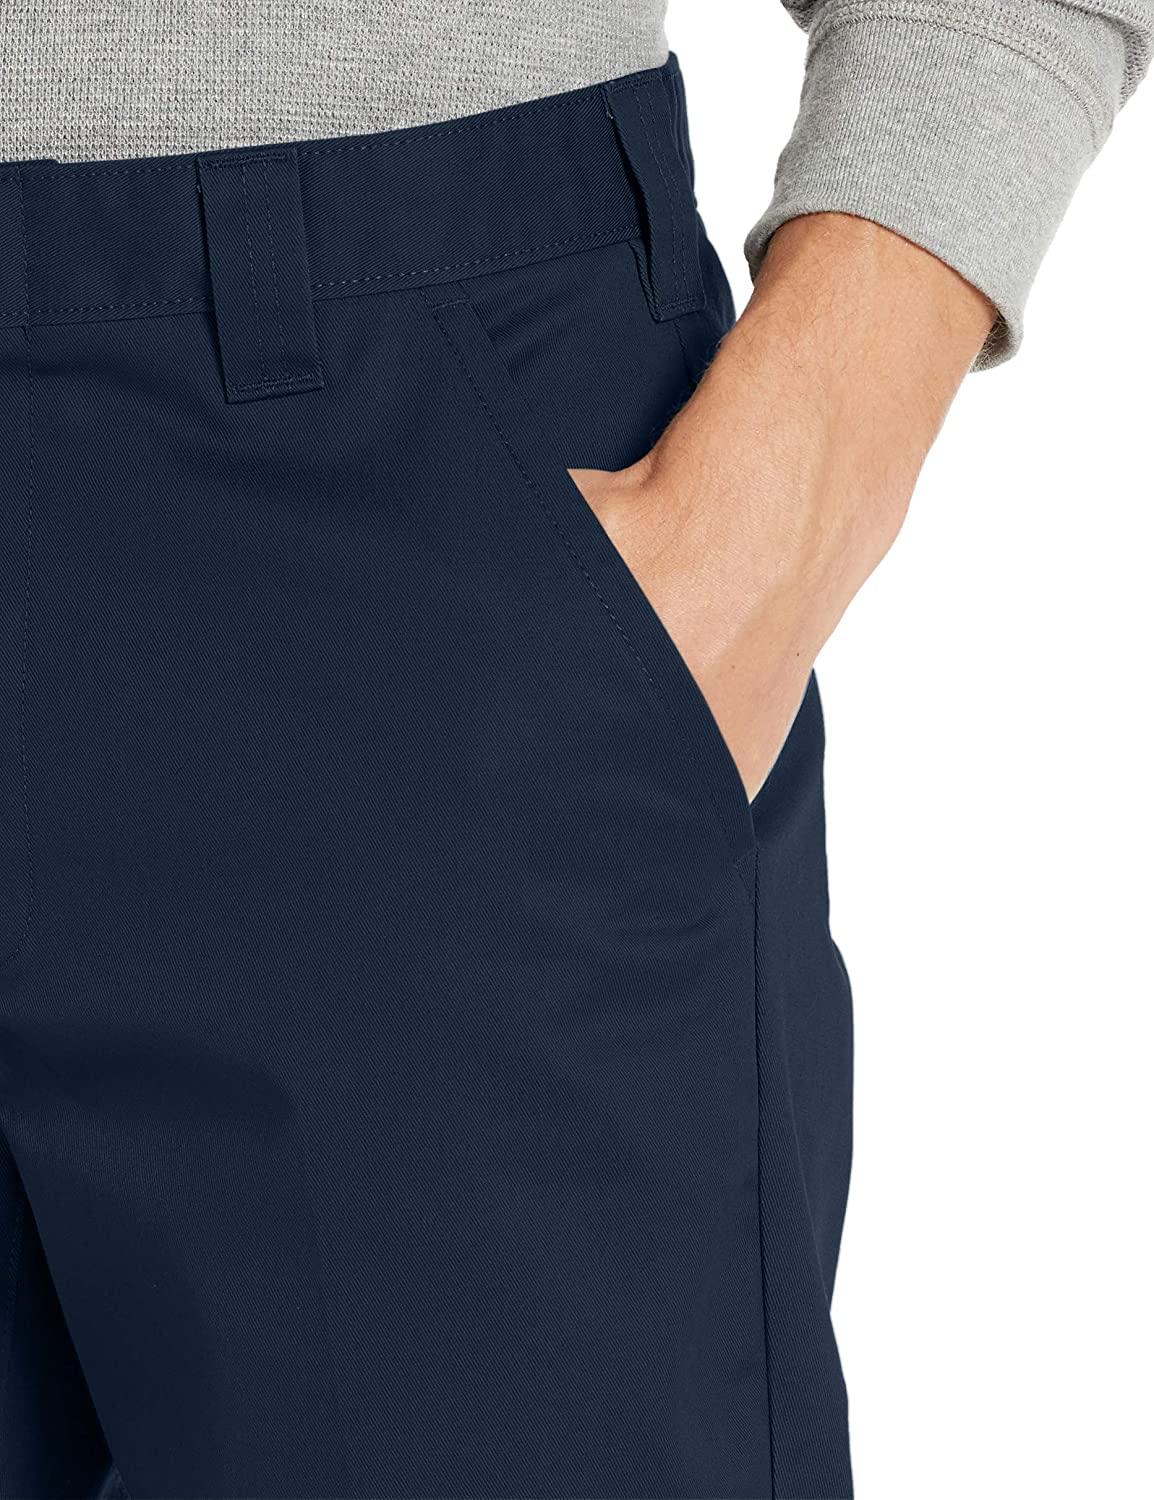 Essentials Men's Stain & Wrinkle-Resistant Classic Work Pant